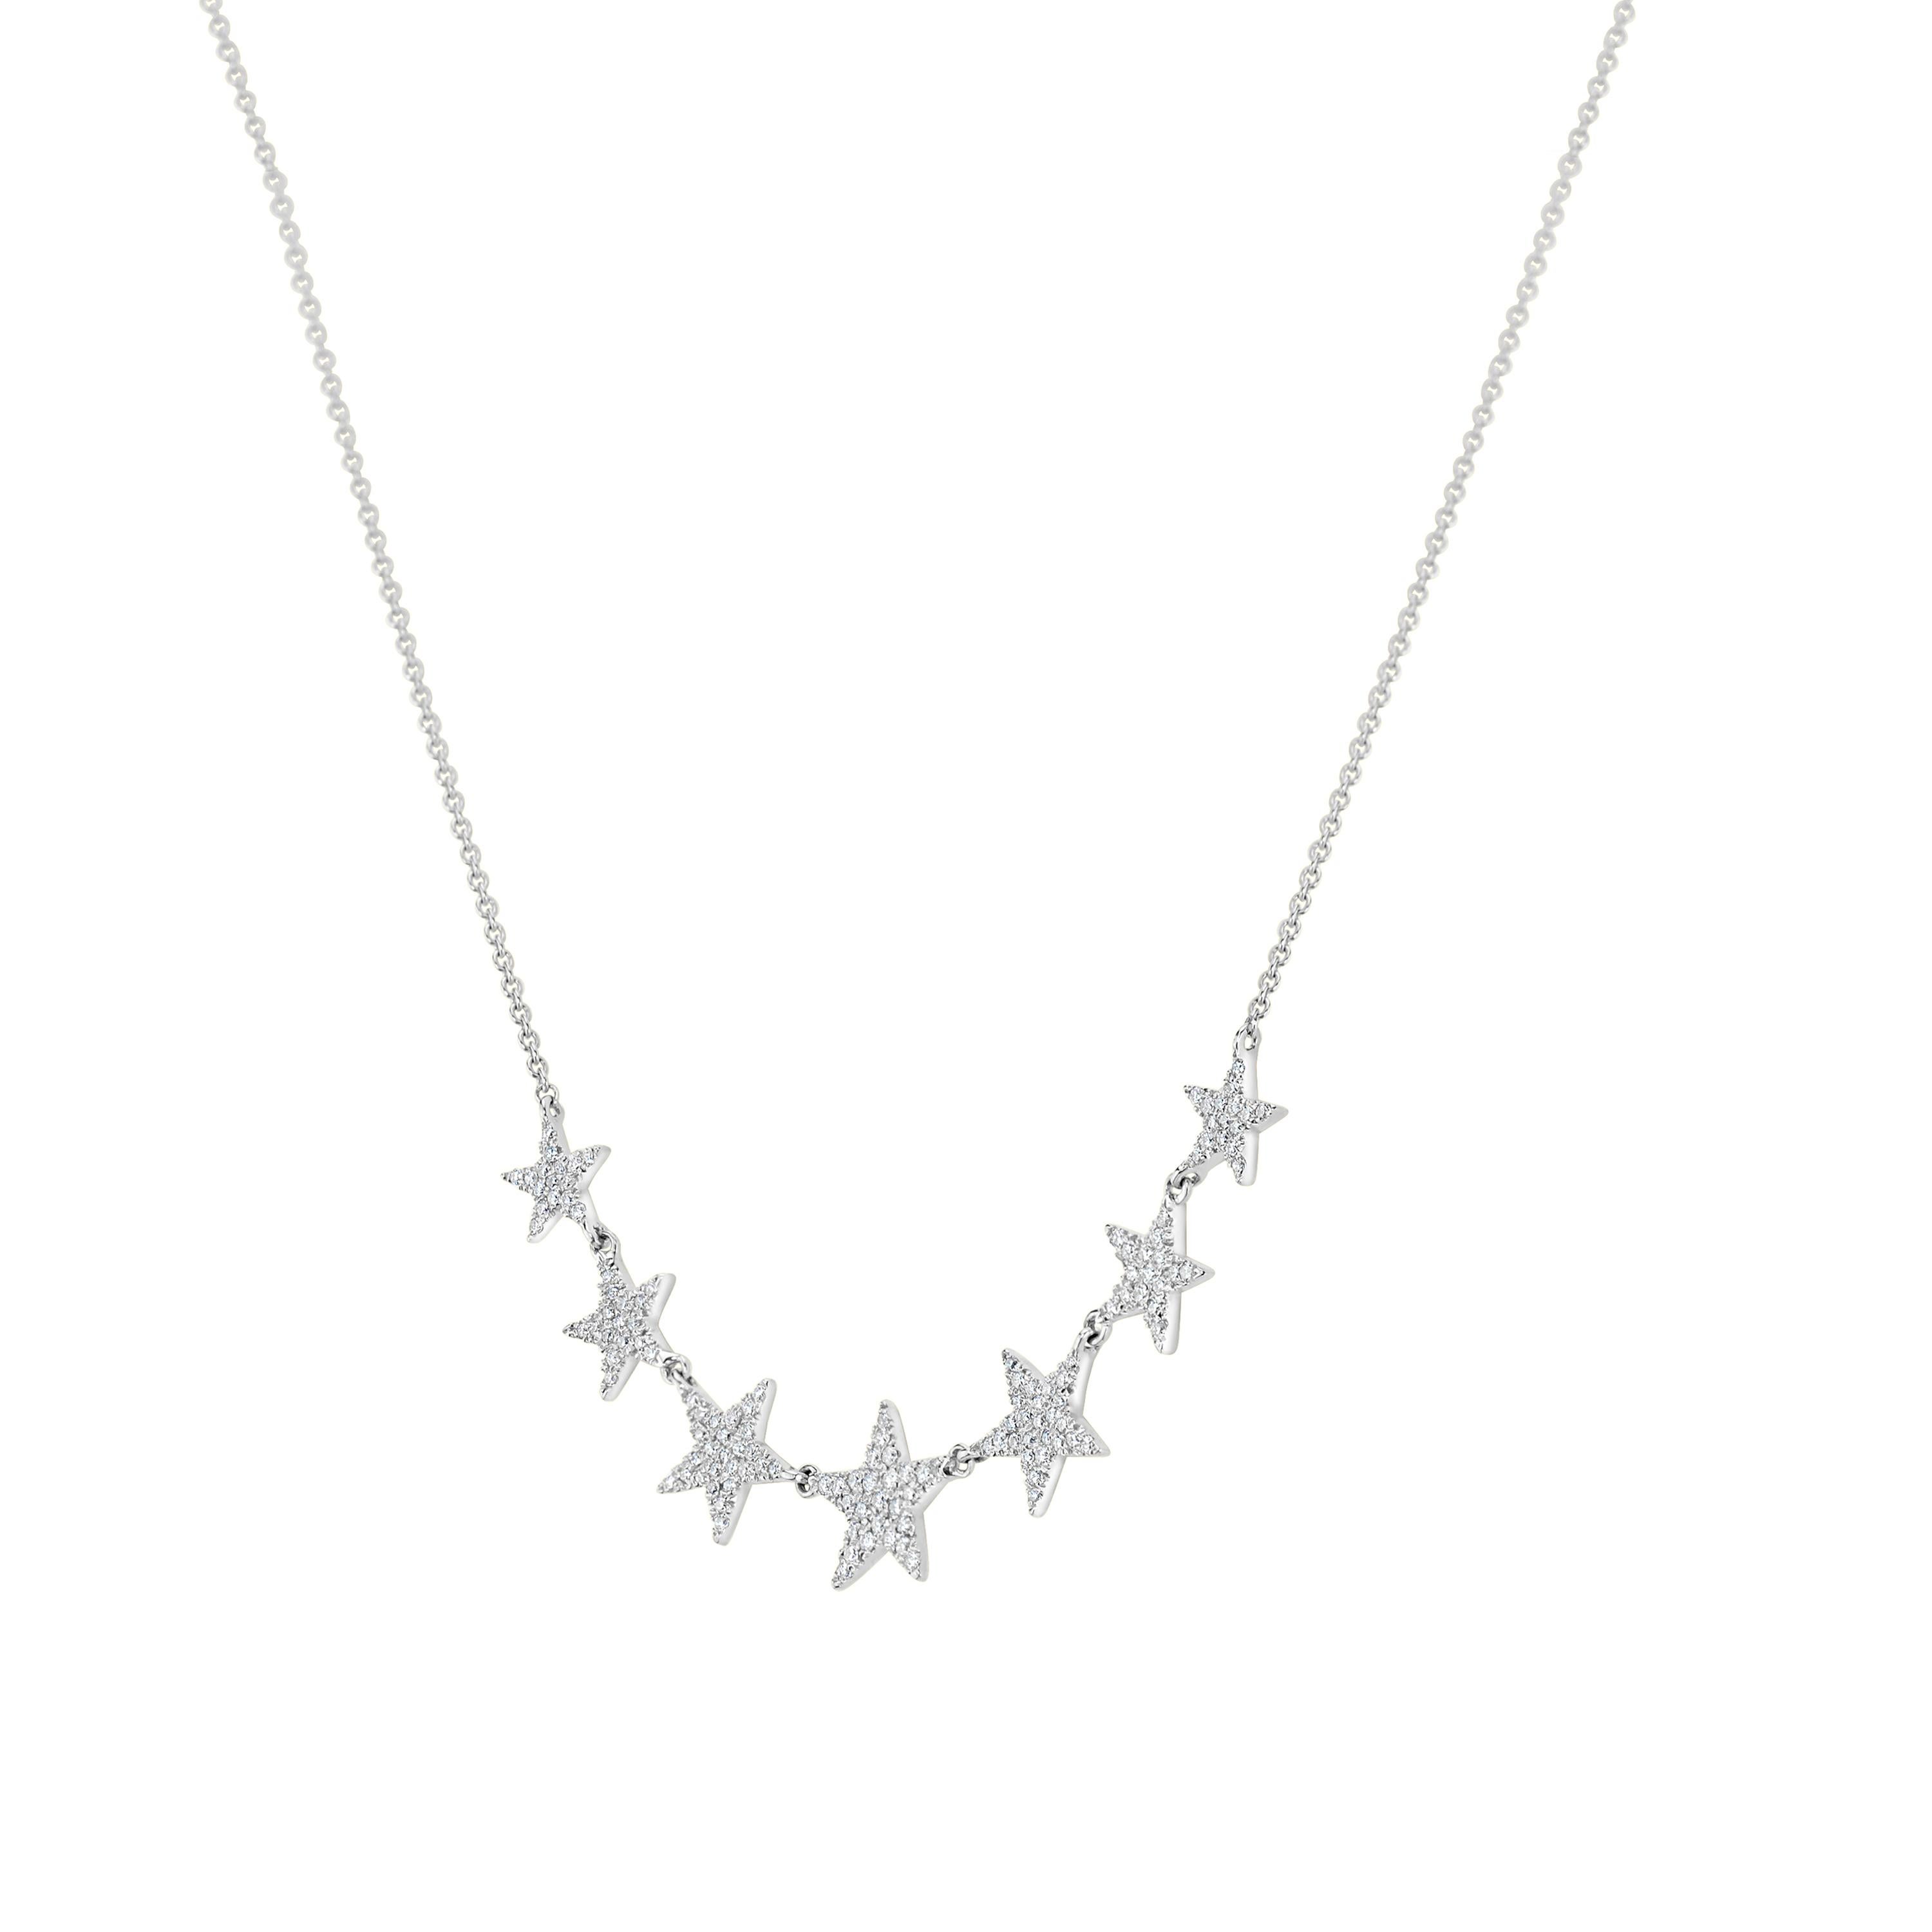 Wear your wishes around your neck with this charming star necklace by Luxle. It is made of 142 round diamonds on pave. It comes with a spring ring clasp and the hanging length is 15 inches.

Please follow the Luxury Jewels storefront to view the